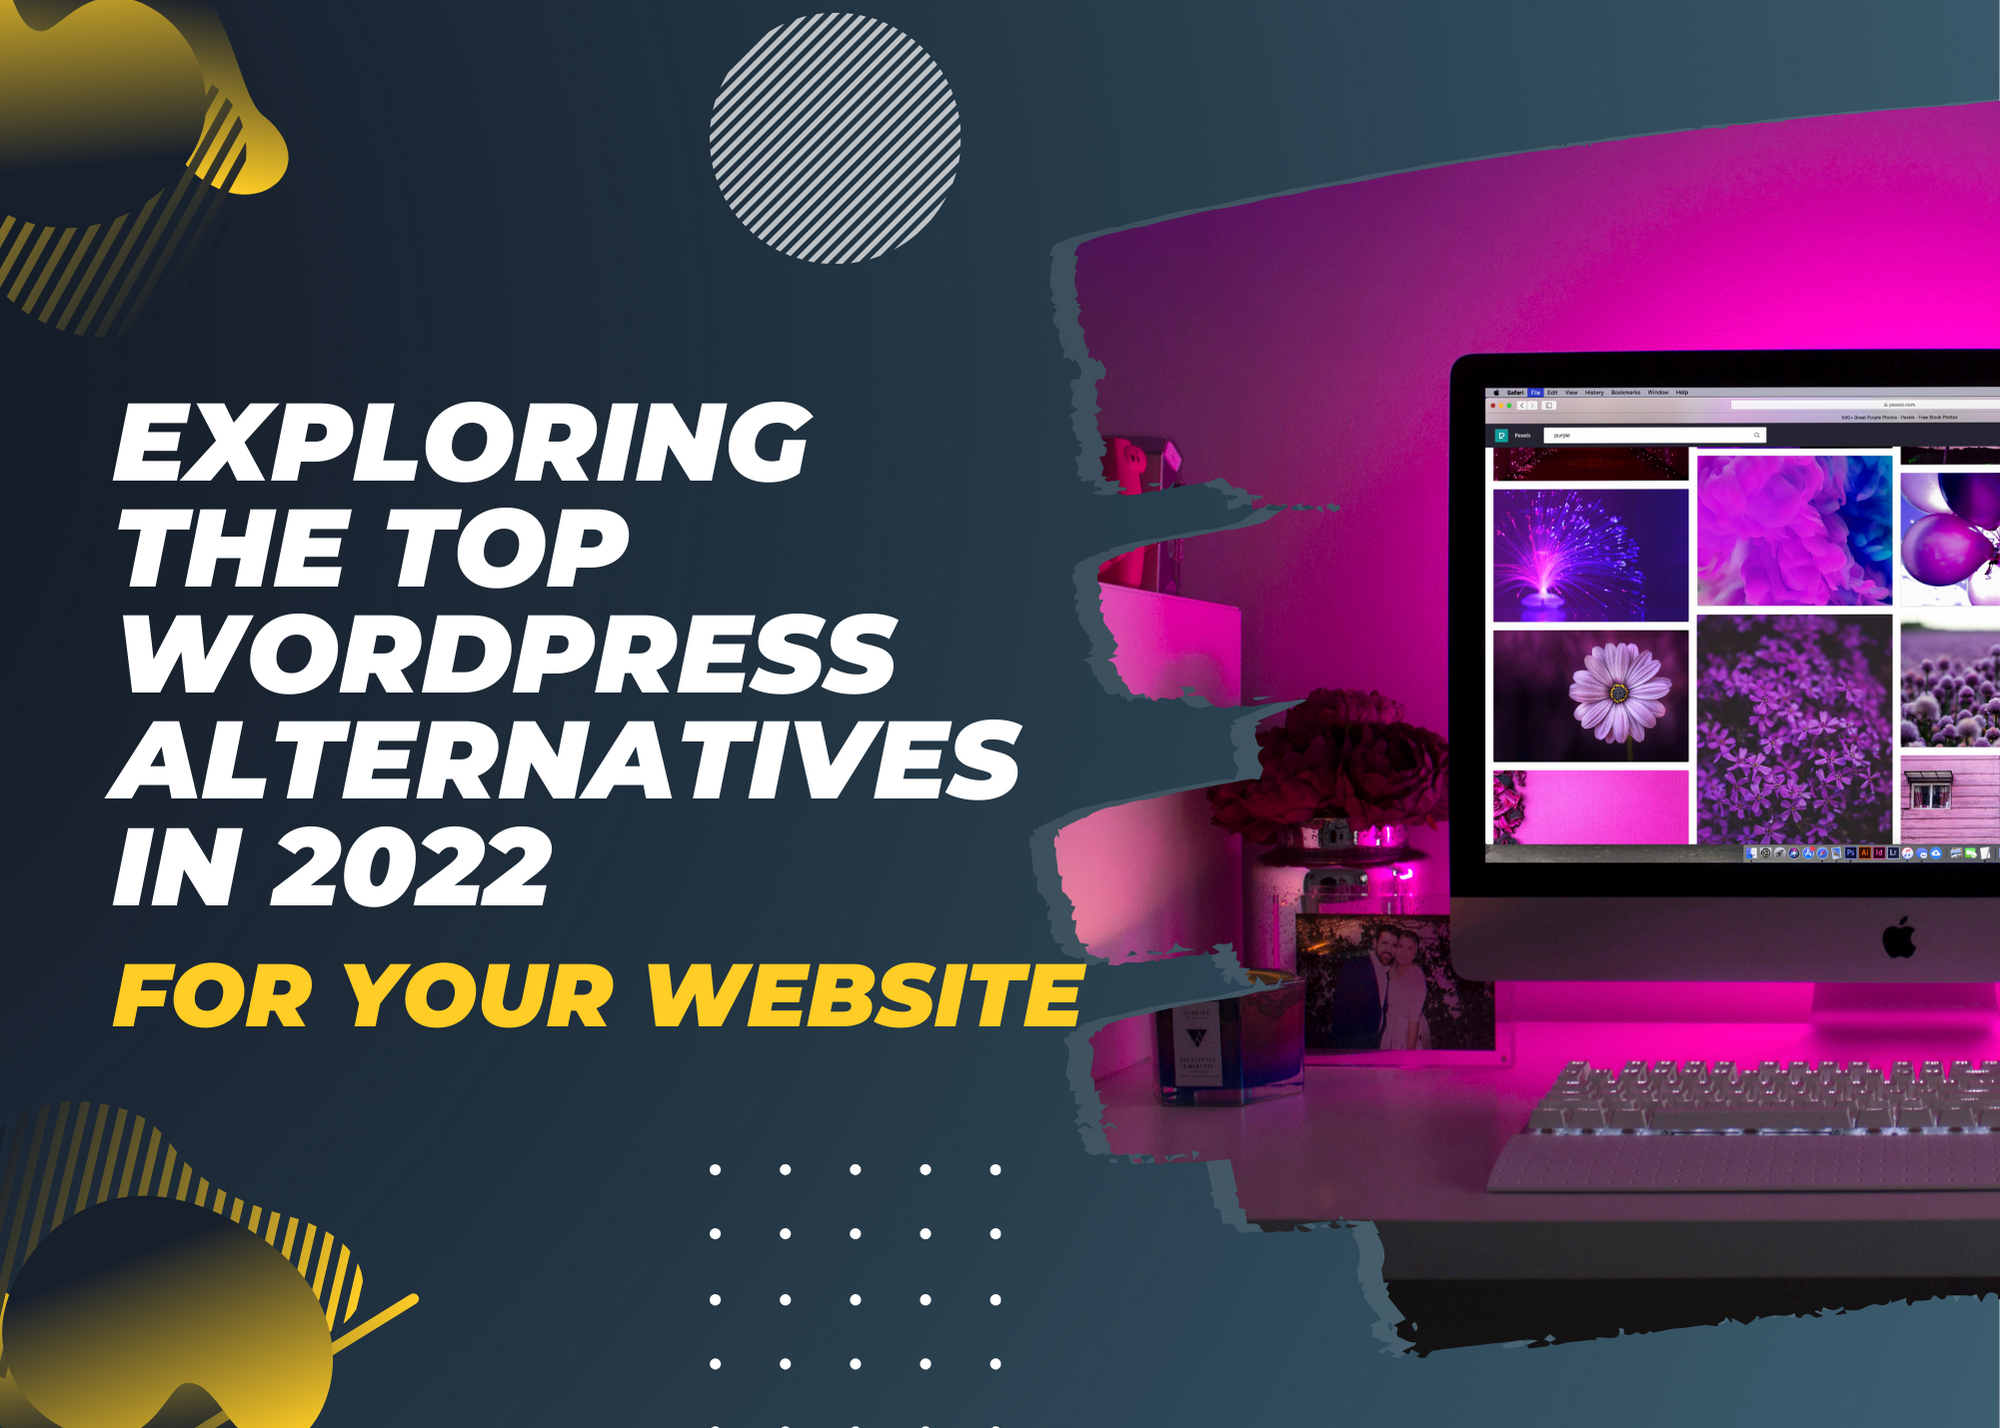 Exploring the Top WordPress Alternatives in 2022 for Your Website